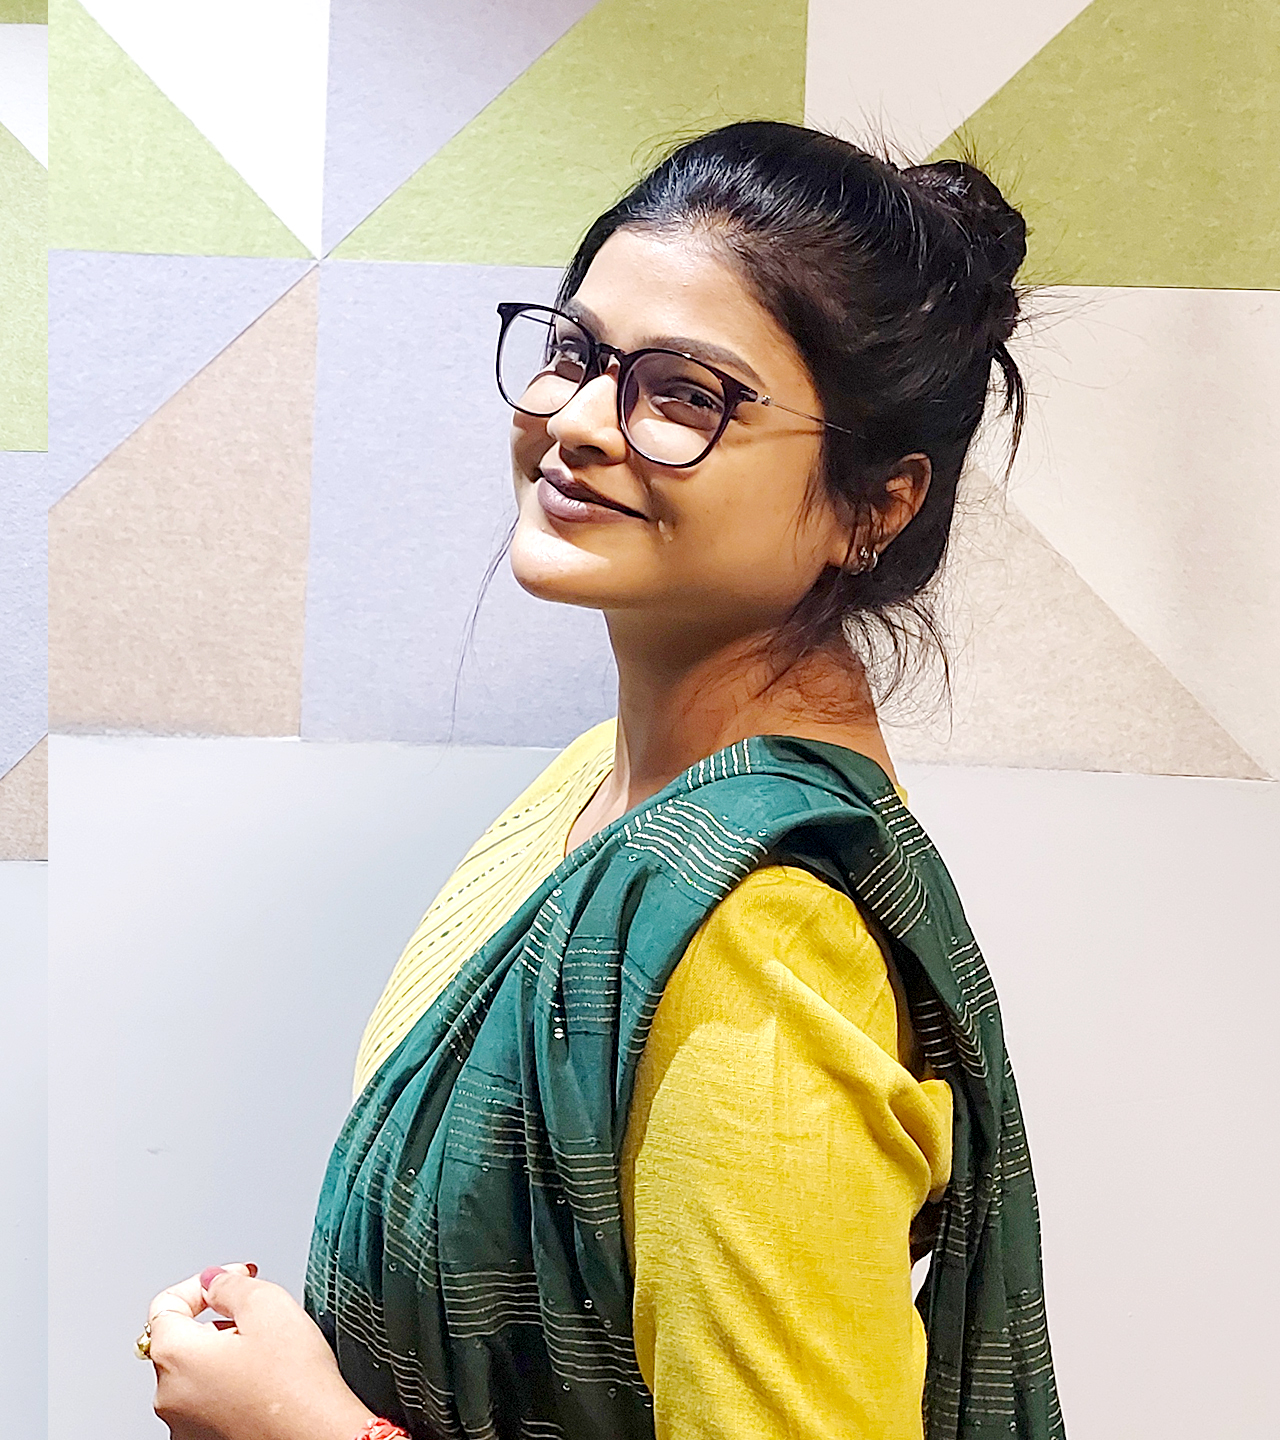 A girl in spectacles and wearing green smiling at the camera.